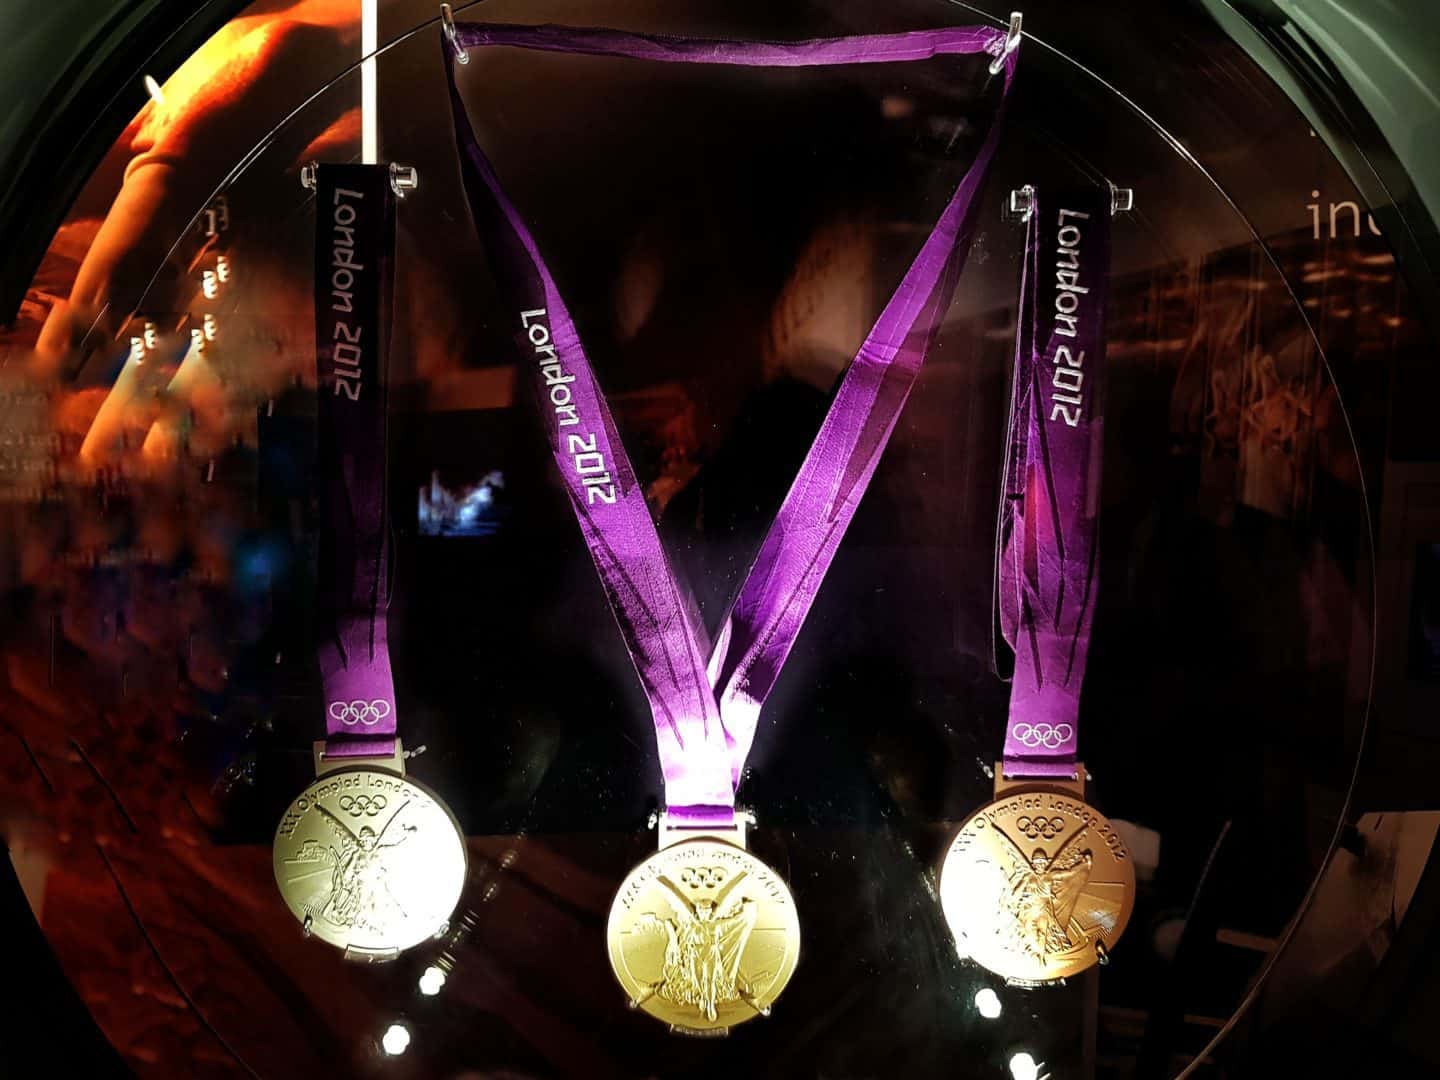 London 2012 Olympic medals on display at Royal Mint Experience